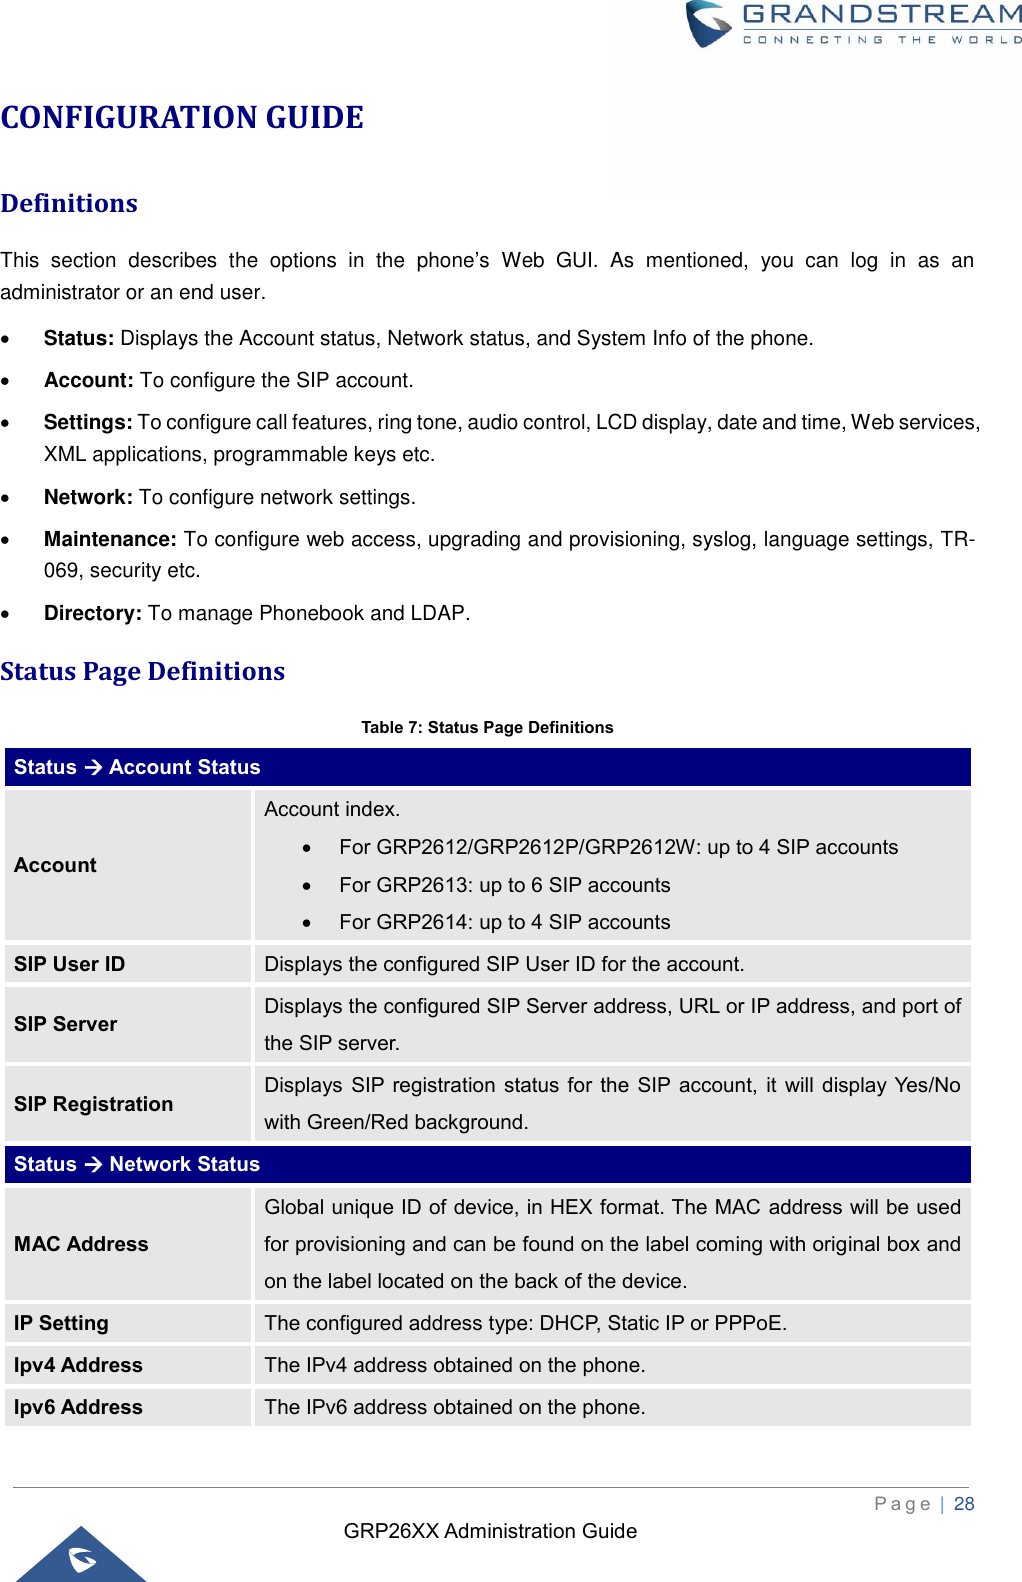 GRP26XX Administration Guide          P a g e  | 28   CONFIGURATION GUIDE Definitions This  section  describes  the  options  in  the  phone’s  Web  GUI.  As  mentioned,  you  can  log  in  as  an administrator or an end user. • Status: Displays the Account status, Network status, and System Info of the phone. • Account: To configure the SIP account. • Settings: To configure call features, ring tone, audio control, LCD display, date and time, Web services, XML applications, programmable keys etc. • Network: To configure network settings. • Maintenance: To configure web access, upgrading and provisioning, syslog, language settings, TR-069, security etc. • Directory: To manage Phonebook and LDAP. Status Page Definitions Table 7: Status Page Definitions Status → Account Status Account Account index.   • For GRP2612/GRP2612P/GRP2612W: up to 4 SIP accounts • For GRP2613: up to 6 SIP accounts • For GRP2614: up to 4 SIP accounts SIP User ID Displays the configured SIP User ID for the account. SIP Server Displays the configured SIP Server address, URL or IP address, and port of the SIP server. SIP Registration Displays  SIP  registration  status for  the SIP account,  it  will  display Yes/No with Green/Red background. Status → Network Status MAC Address Global unique ID of device, in HEX format. The MAC address will be used for provisioning and can be found on the label coming with original box and on the label located on the back of the device. IP Setting The configured address type: DHCP, Static IP or PPPoE. Ipv4 Address The IPv4 address obtained on the phone. Ipv6 Address The IPv6 address obtained on the phone. 